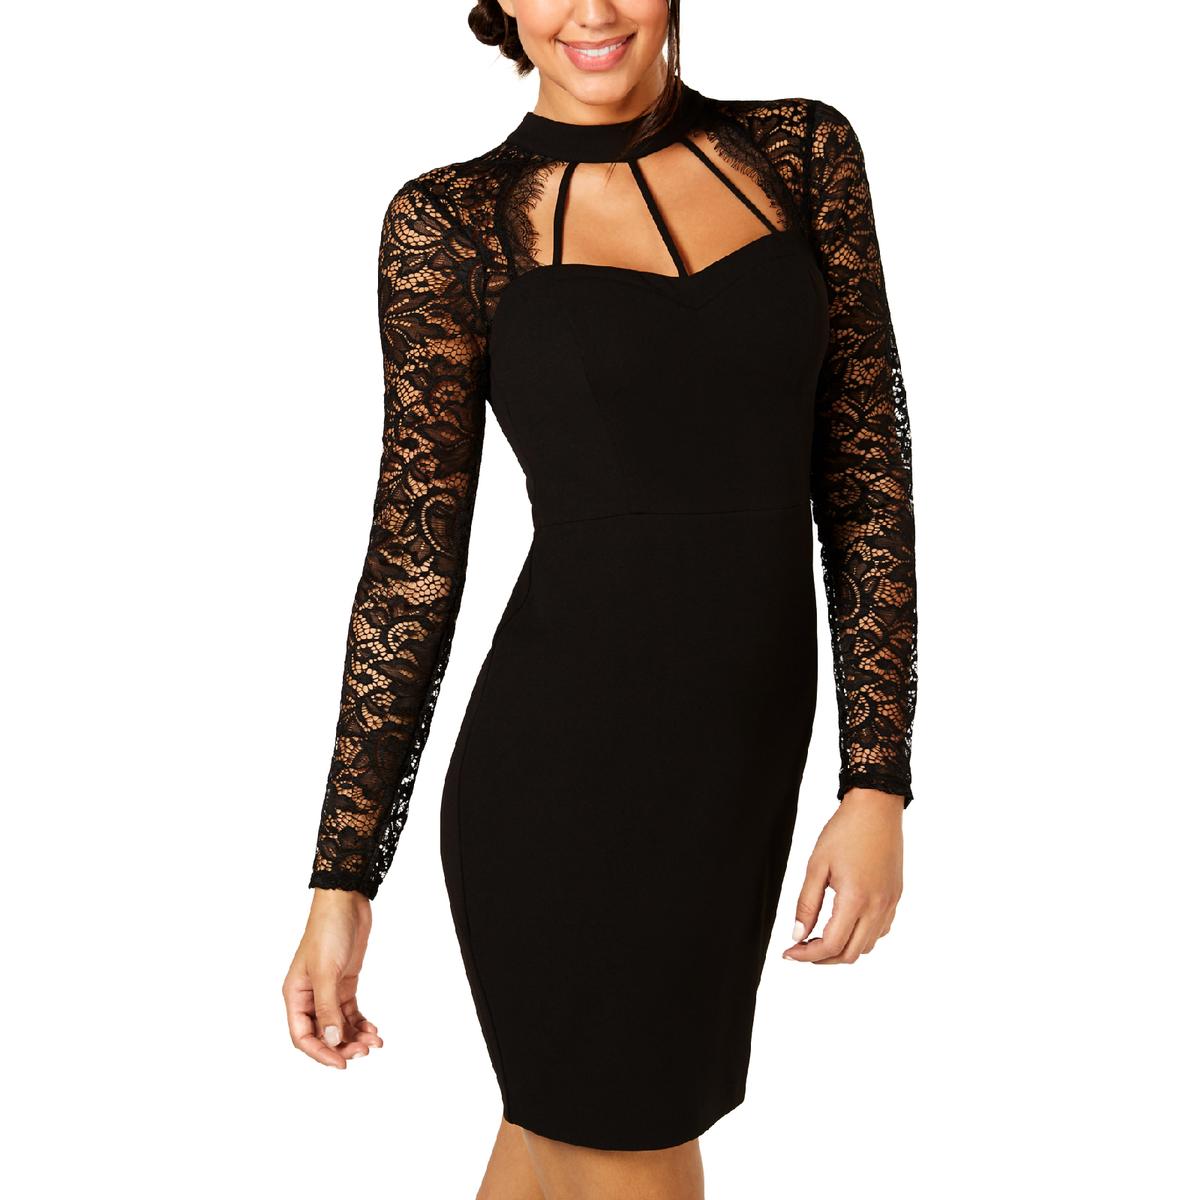 Guess Womens Black Bodycon Lace-Sleeve Party Cocktail Dress 2 BHFO 8178 ...